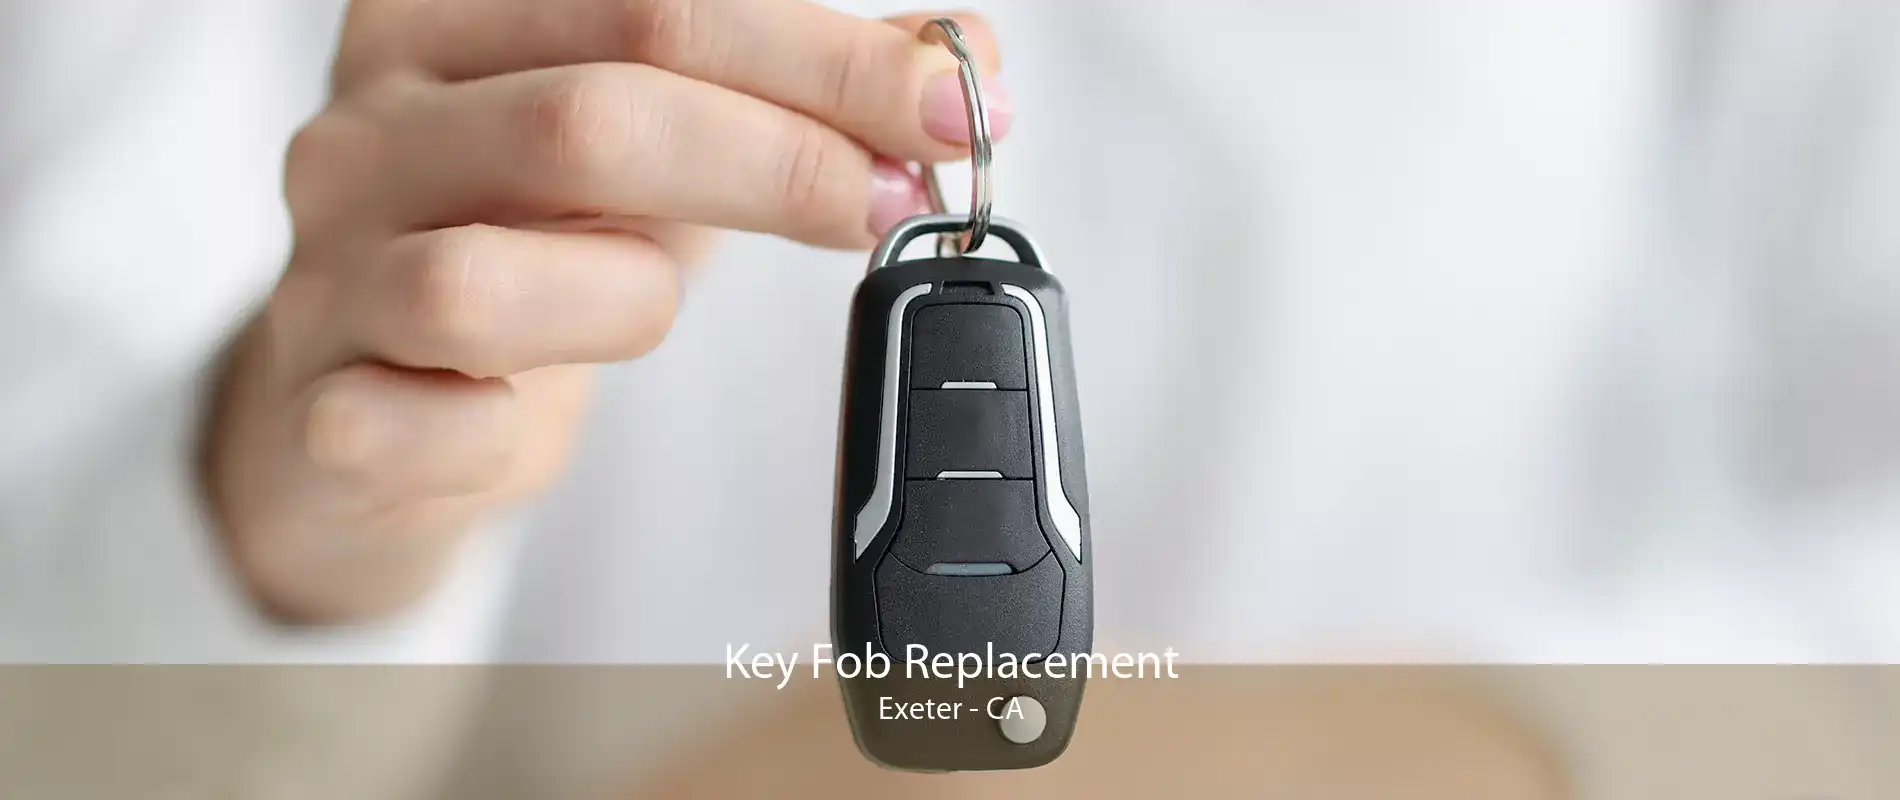 Key Fob Replacement Exeter - CA